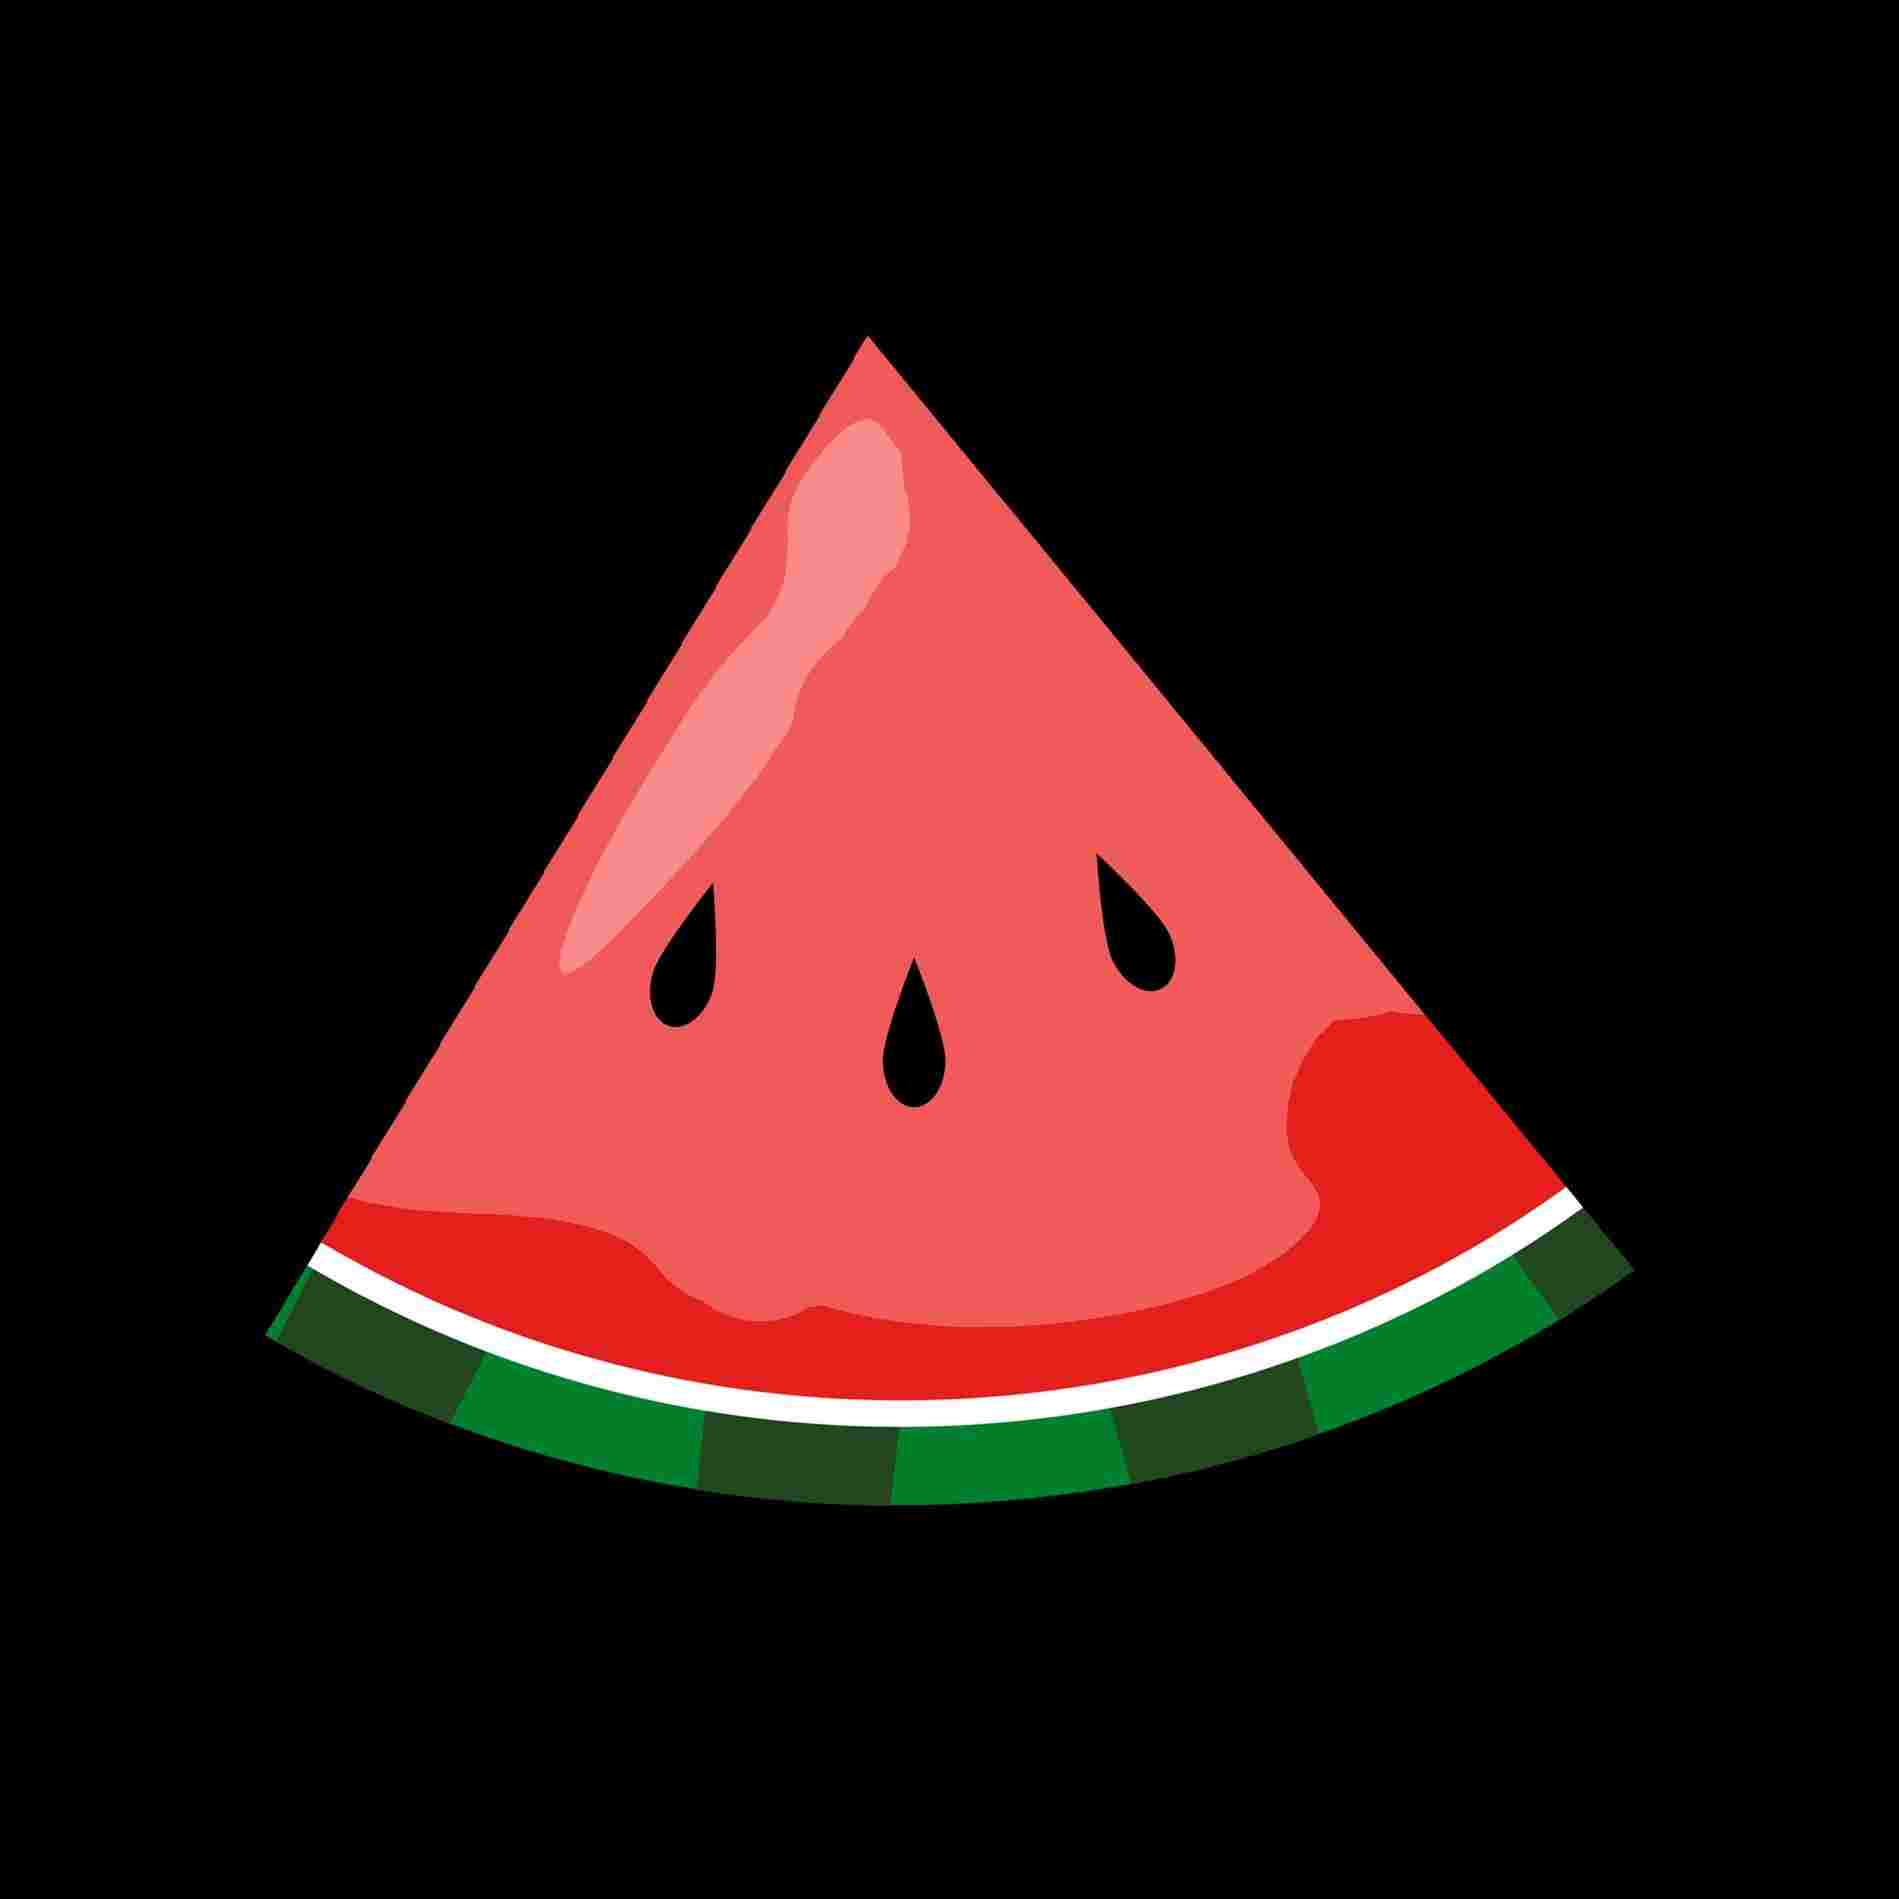 How To Draw A Slice Of Watermelon ~ How To Cut, De-seed And Serve